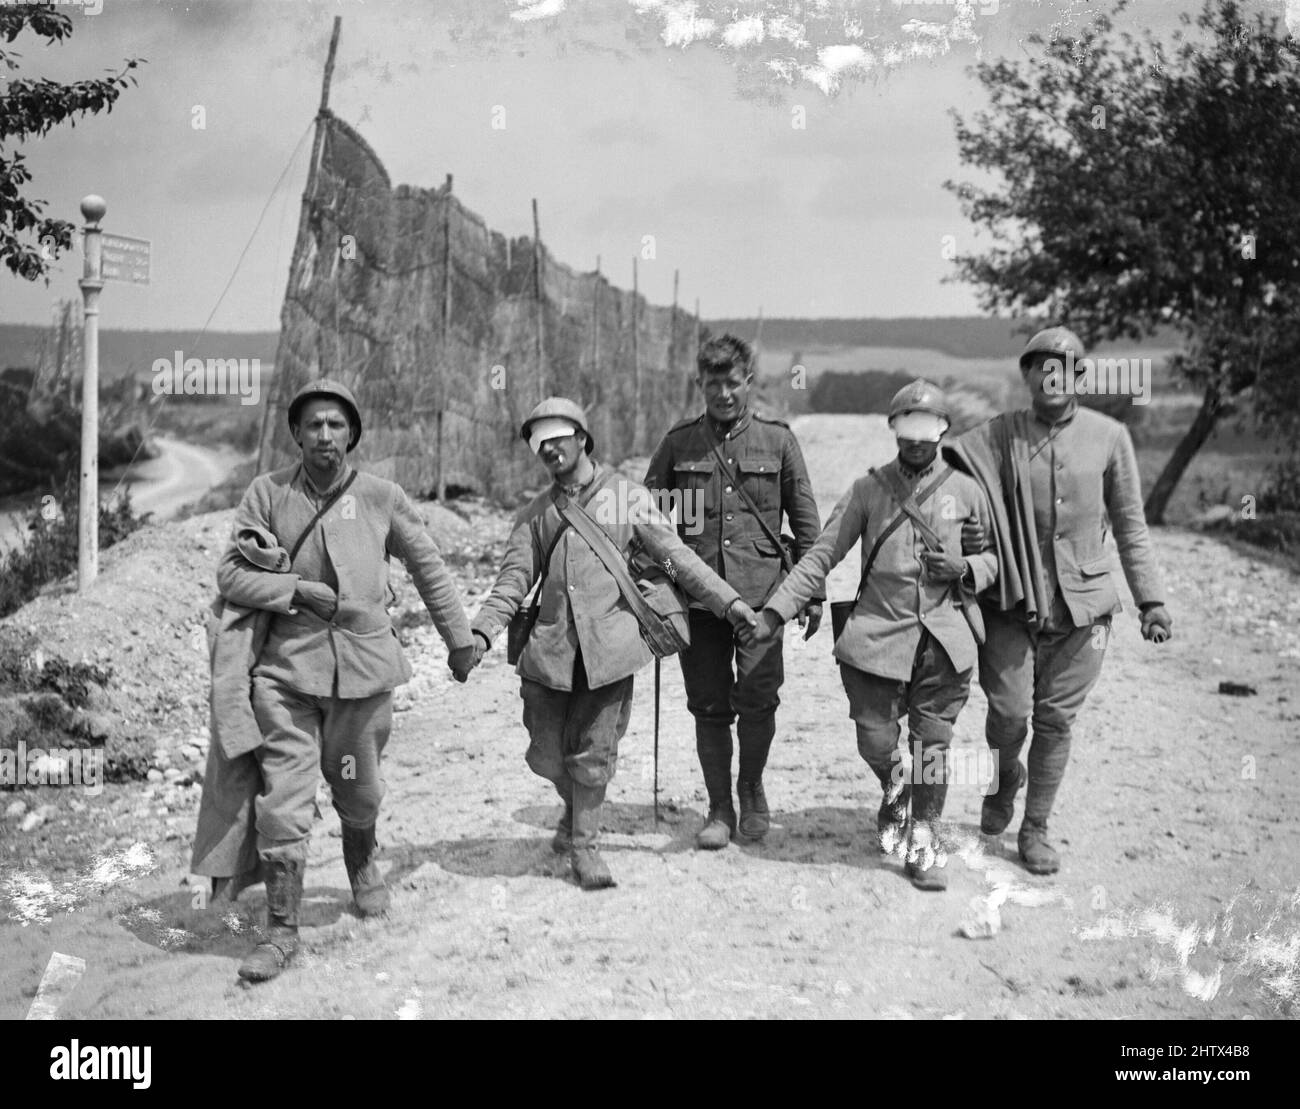 A group of four walking wounded French soldiers. Three of the French soldiers are holding hands, guiding the central man who appears to have been injured by gas: his eyes are covered with a bandage. A British soldier can be seen in the centre of the photograph. Stock Photo